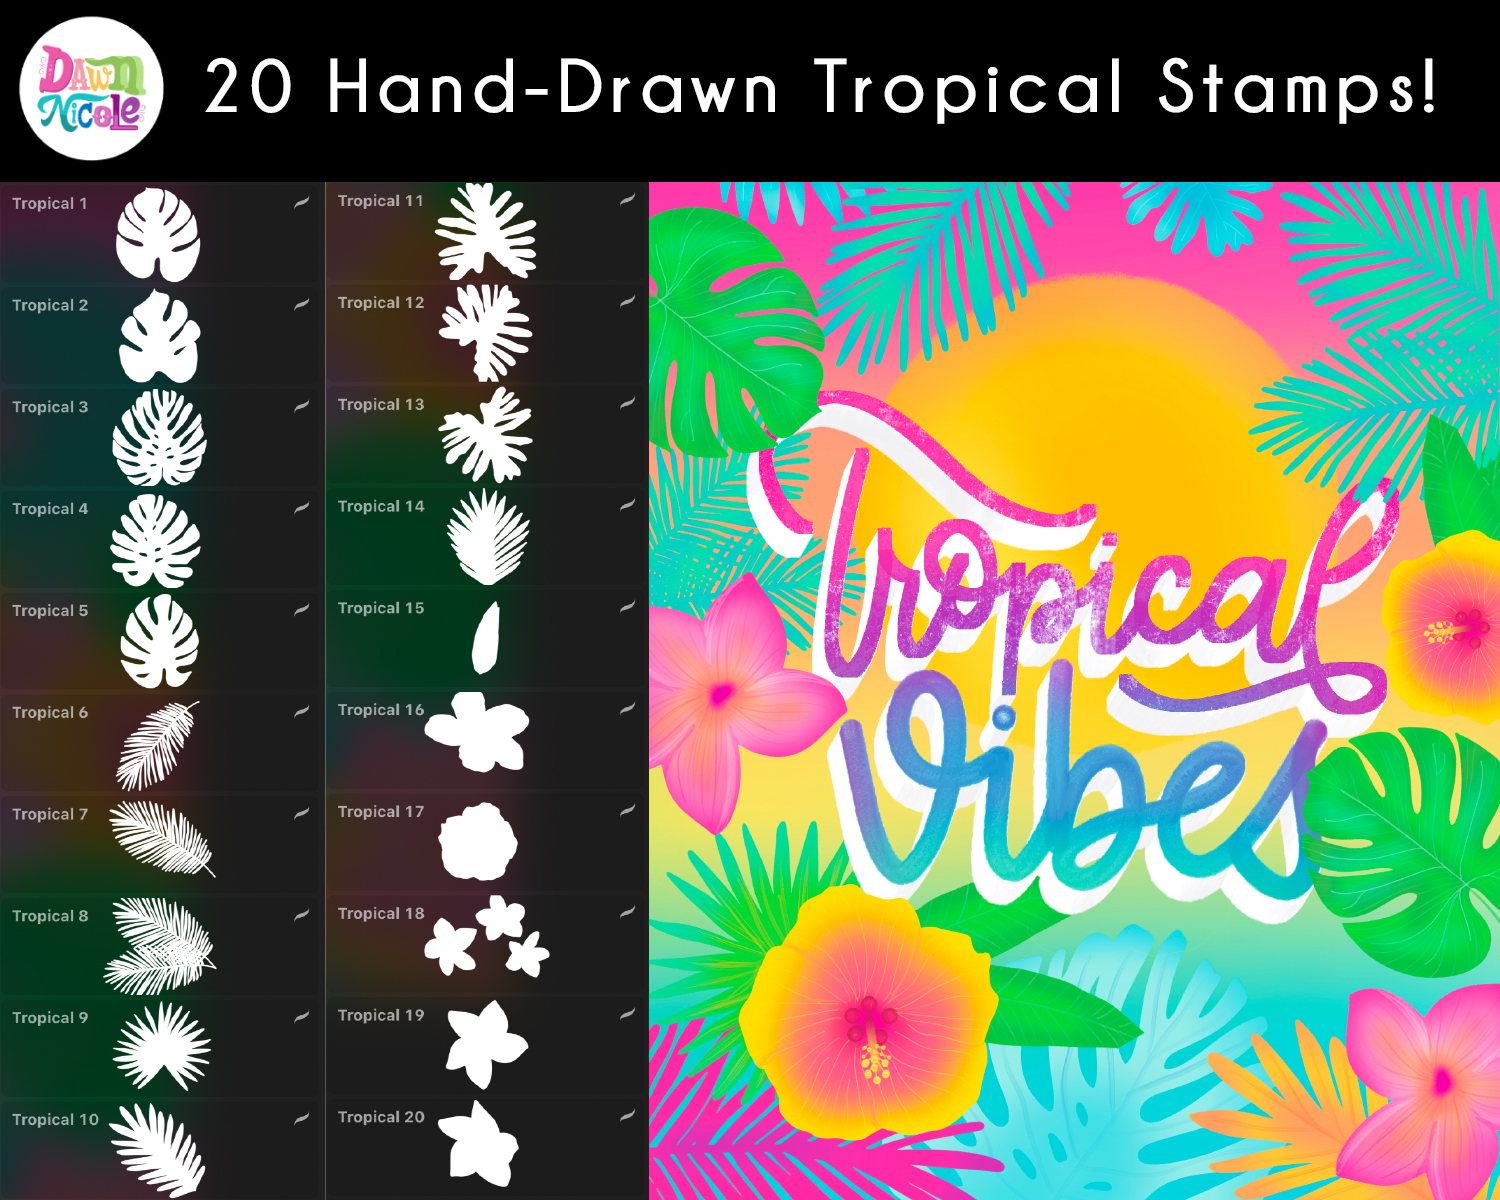 Tropical Vibes Procreate Lettering Kit. My newest Procreate Brush Bundle is full of vacation vibes. 4 new brushes, 20 hand-drawn stamps, and my tropical color palette.